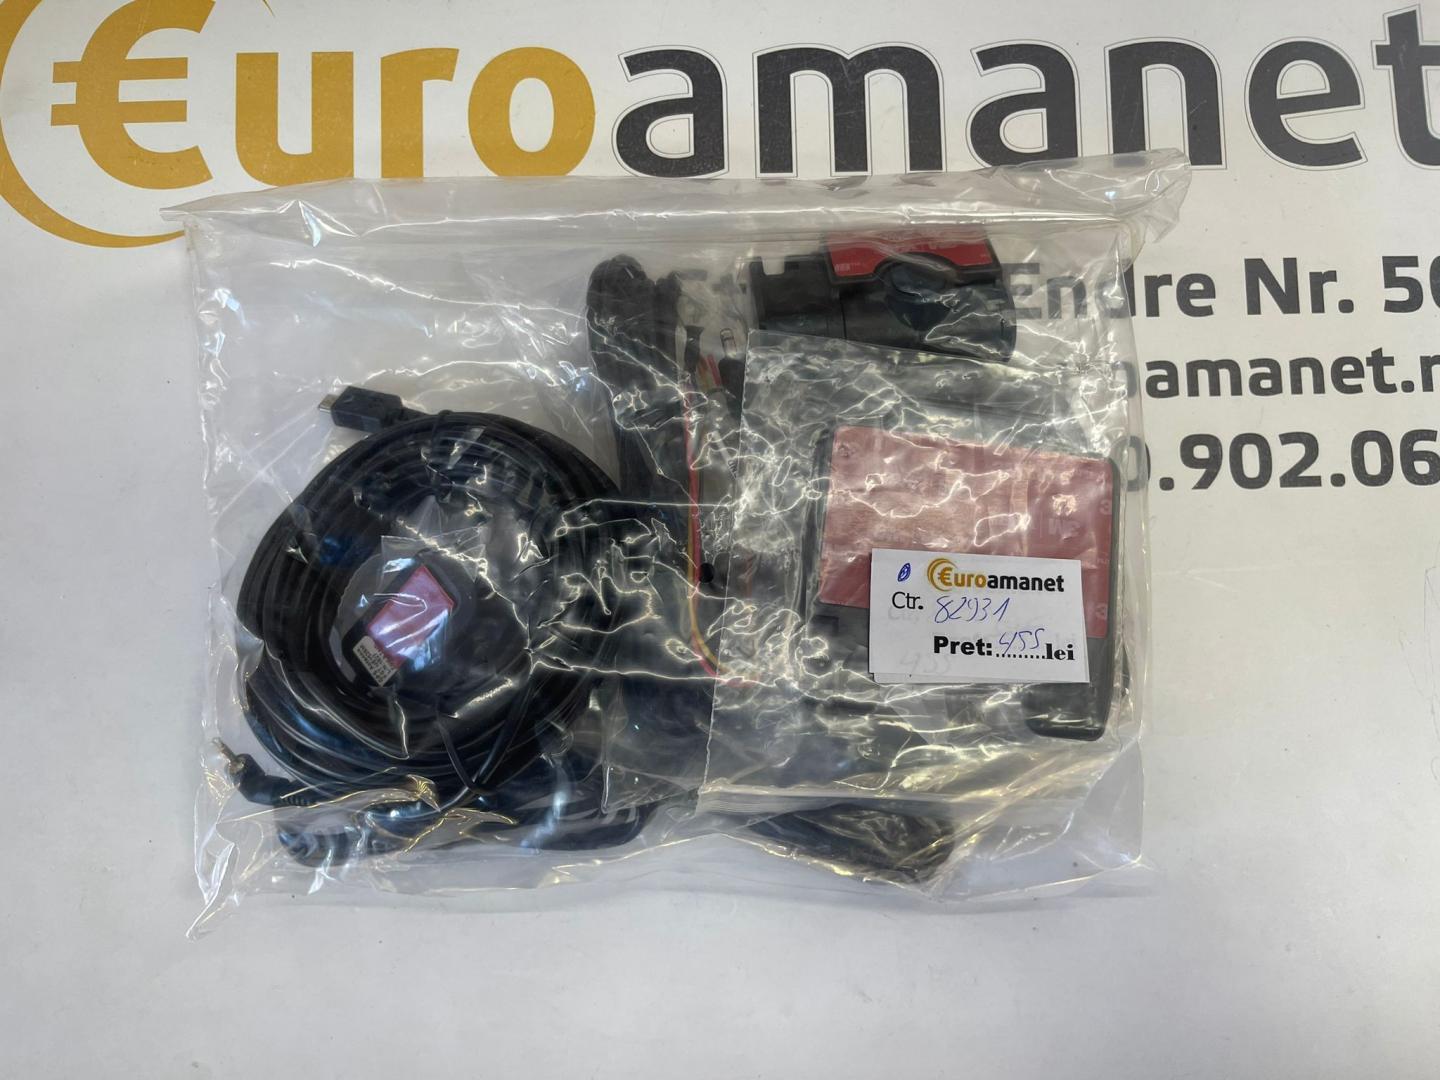 Kit complet camere video auto  image 1